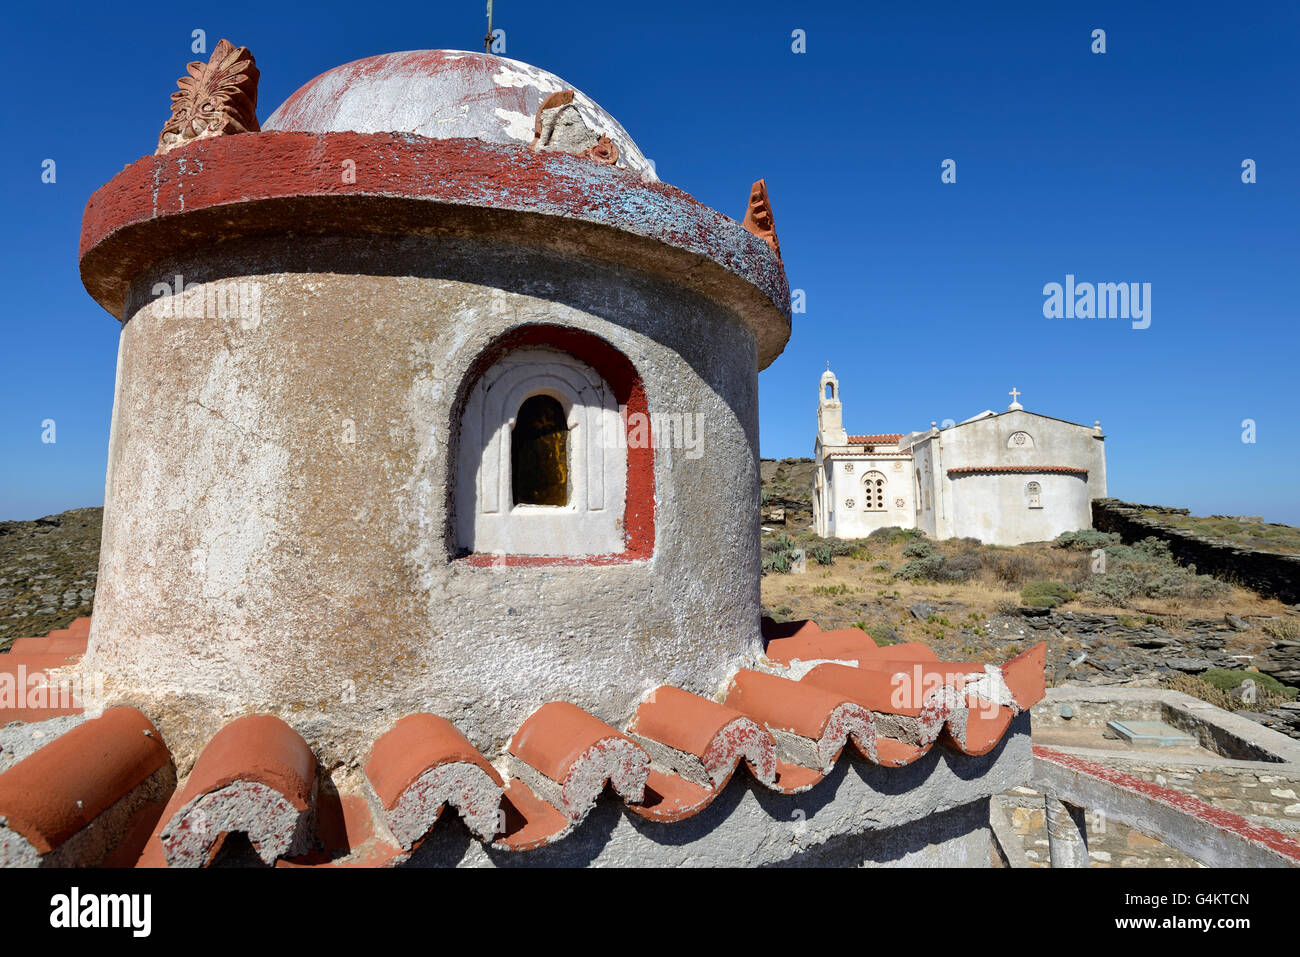 Chapels in Tinos island, Greece Stock Photo